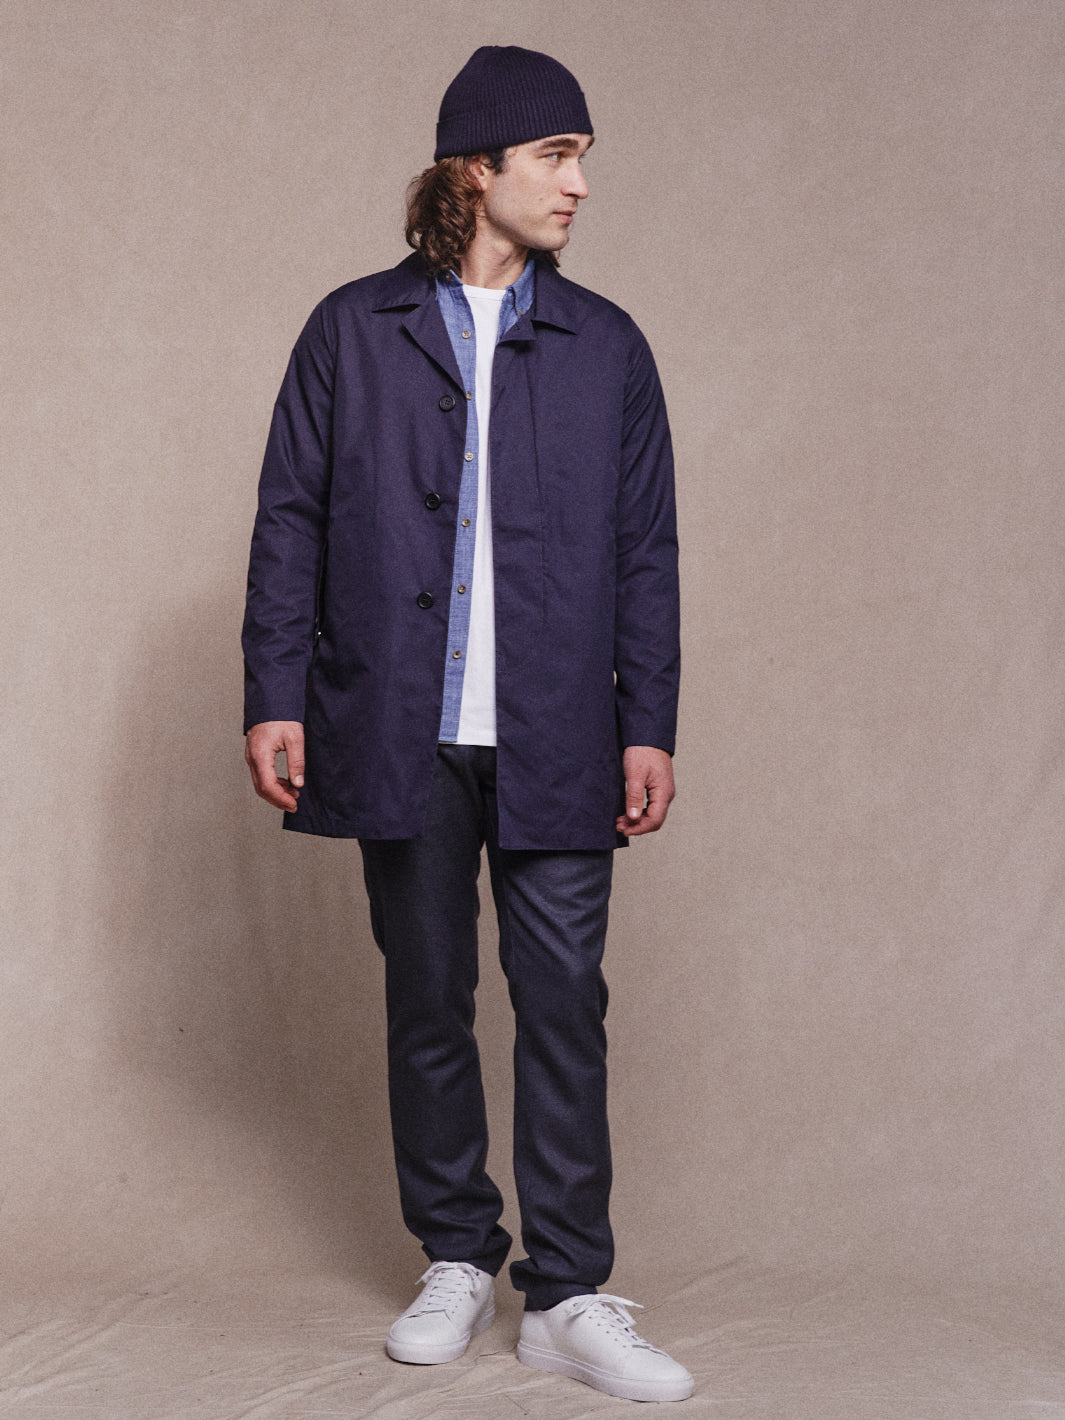 Model wearing Rain Mac Jacket in Navy with Navy Beanie, Denim Shirt, White Tee, Smart Trousers and White Sneakers